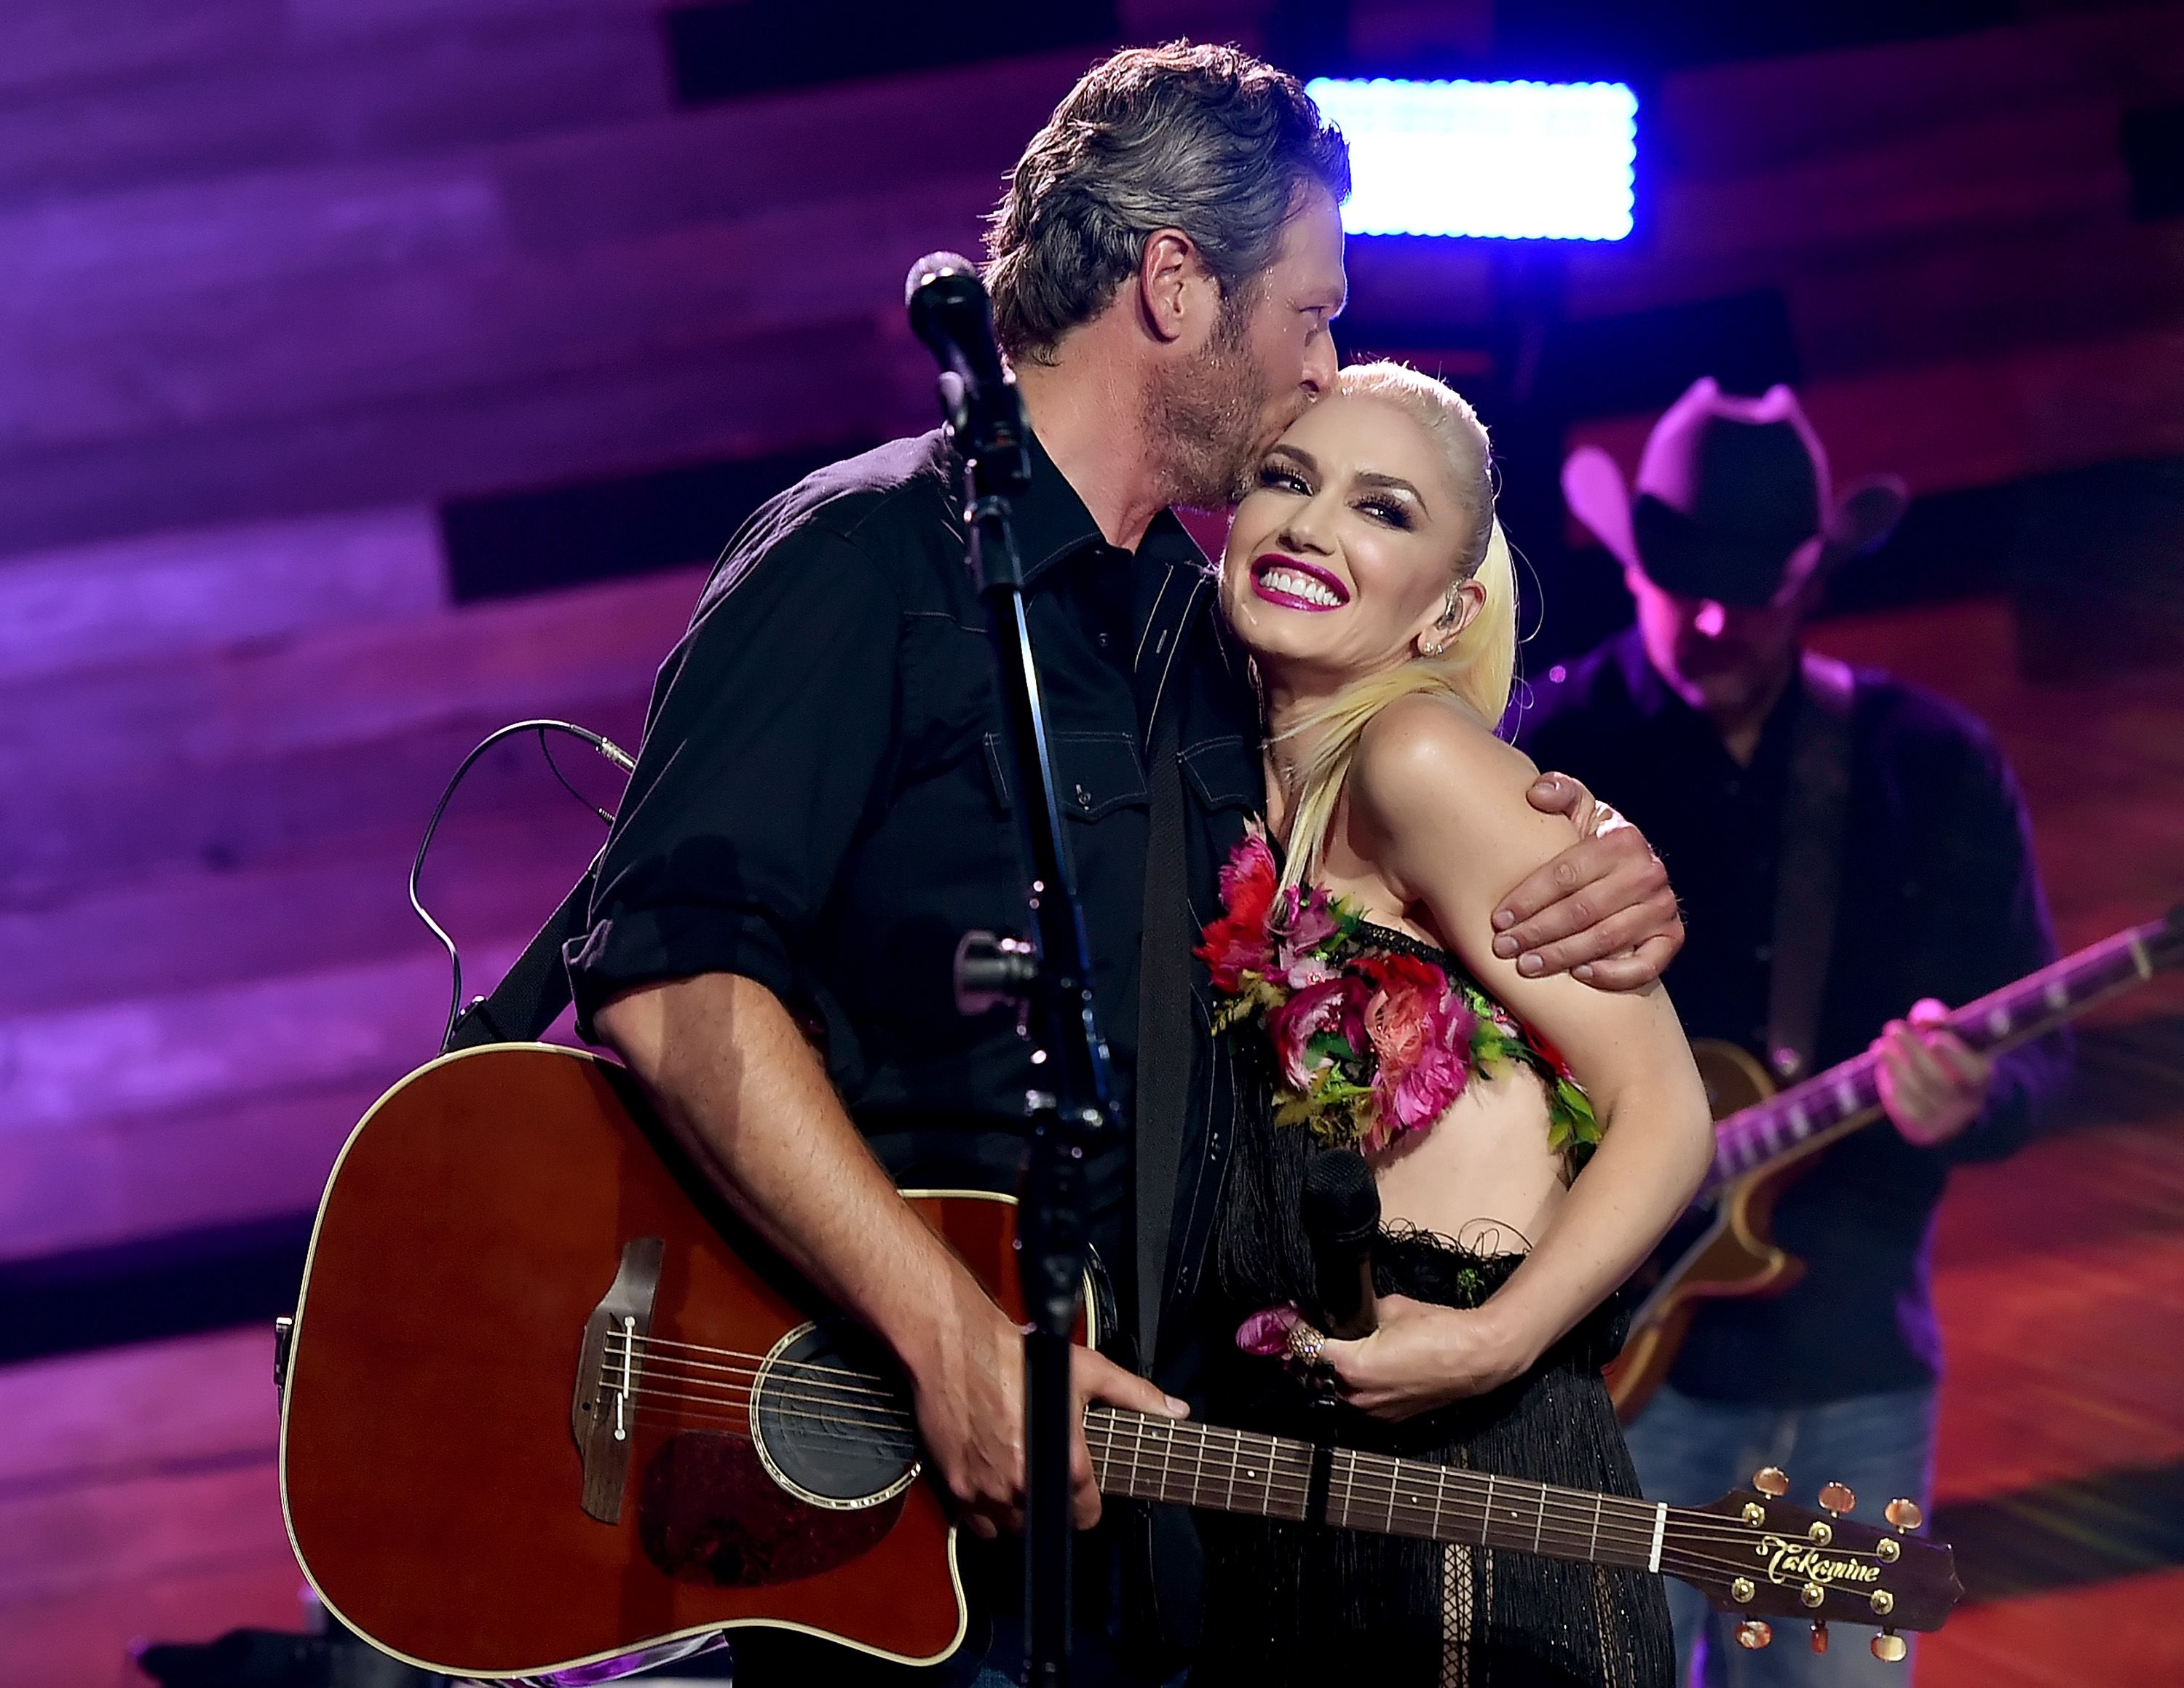 Blake Shelton and Gwen Stefani perform on the Honda Stage at the iHeartRadio Theater on May 9, 2016 in Burbank, California | Photo: Getty Images